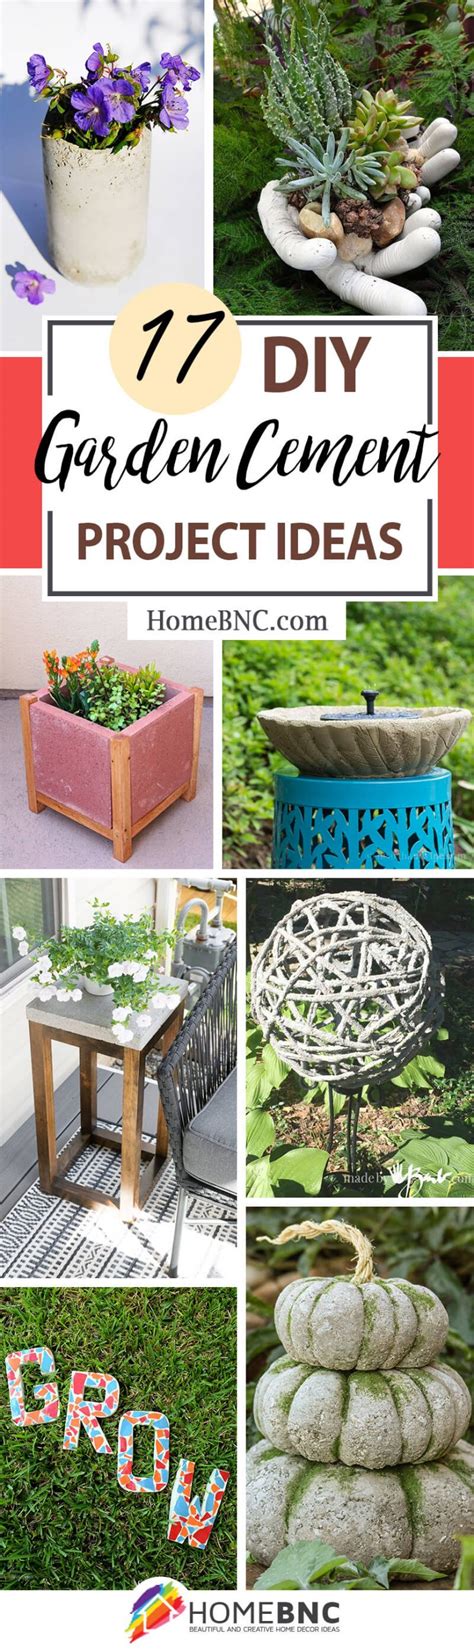 17 Easy DIY Garden Cement Project Ideas on a Budget for 2022